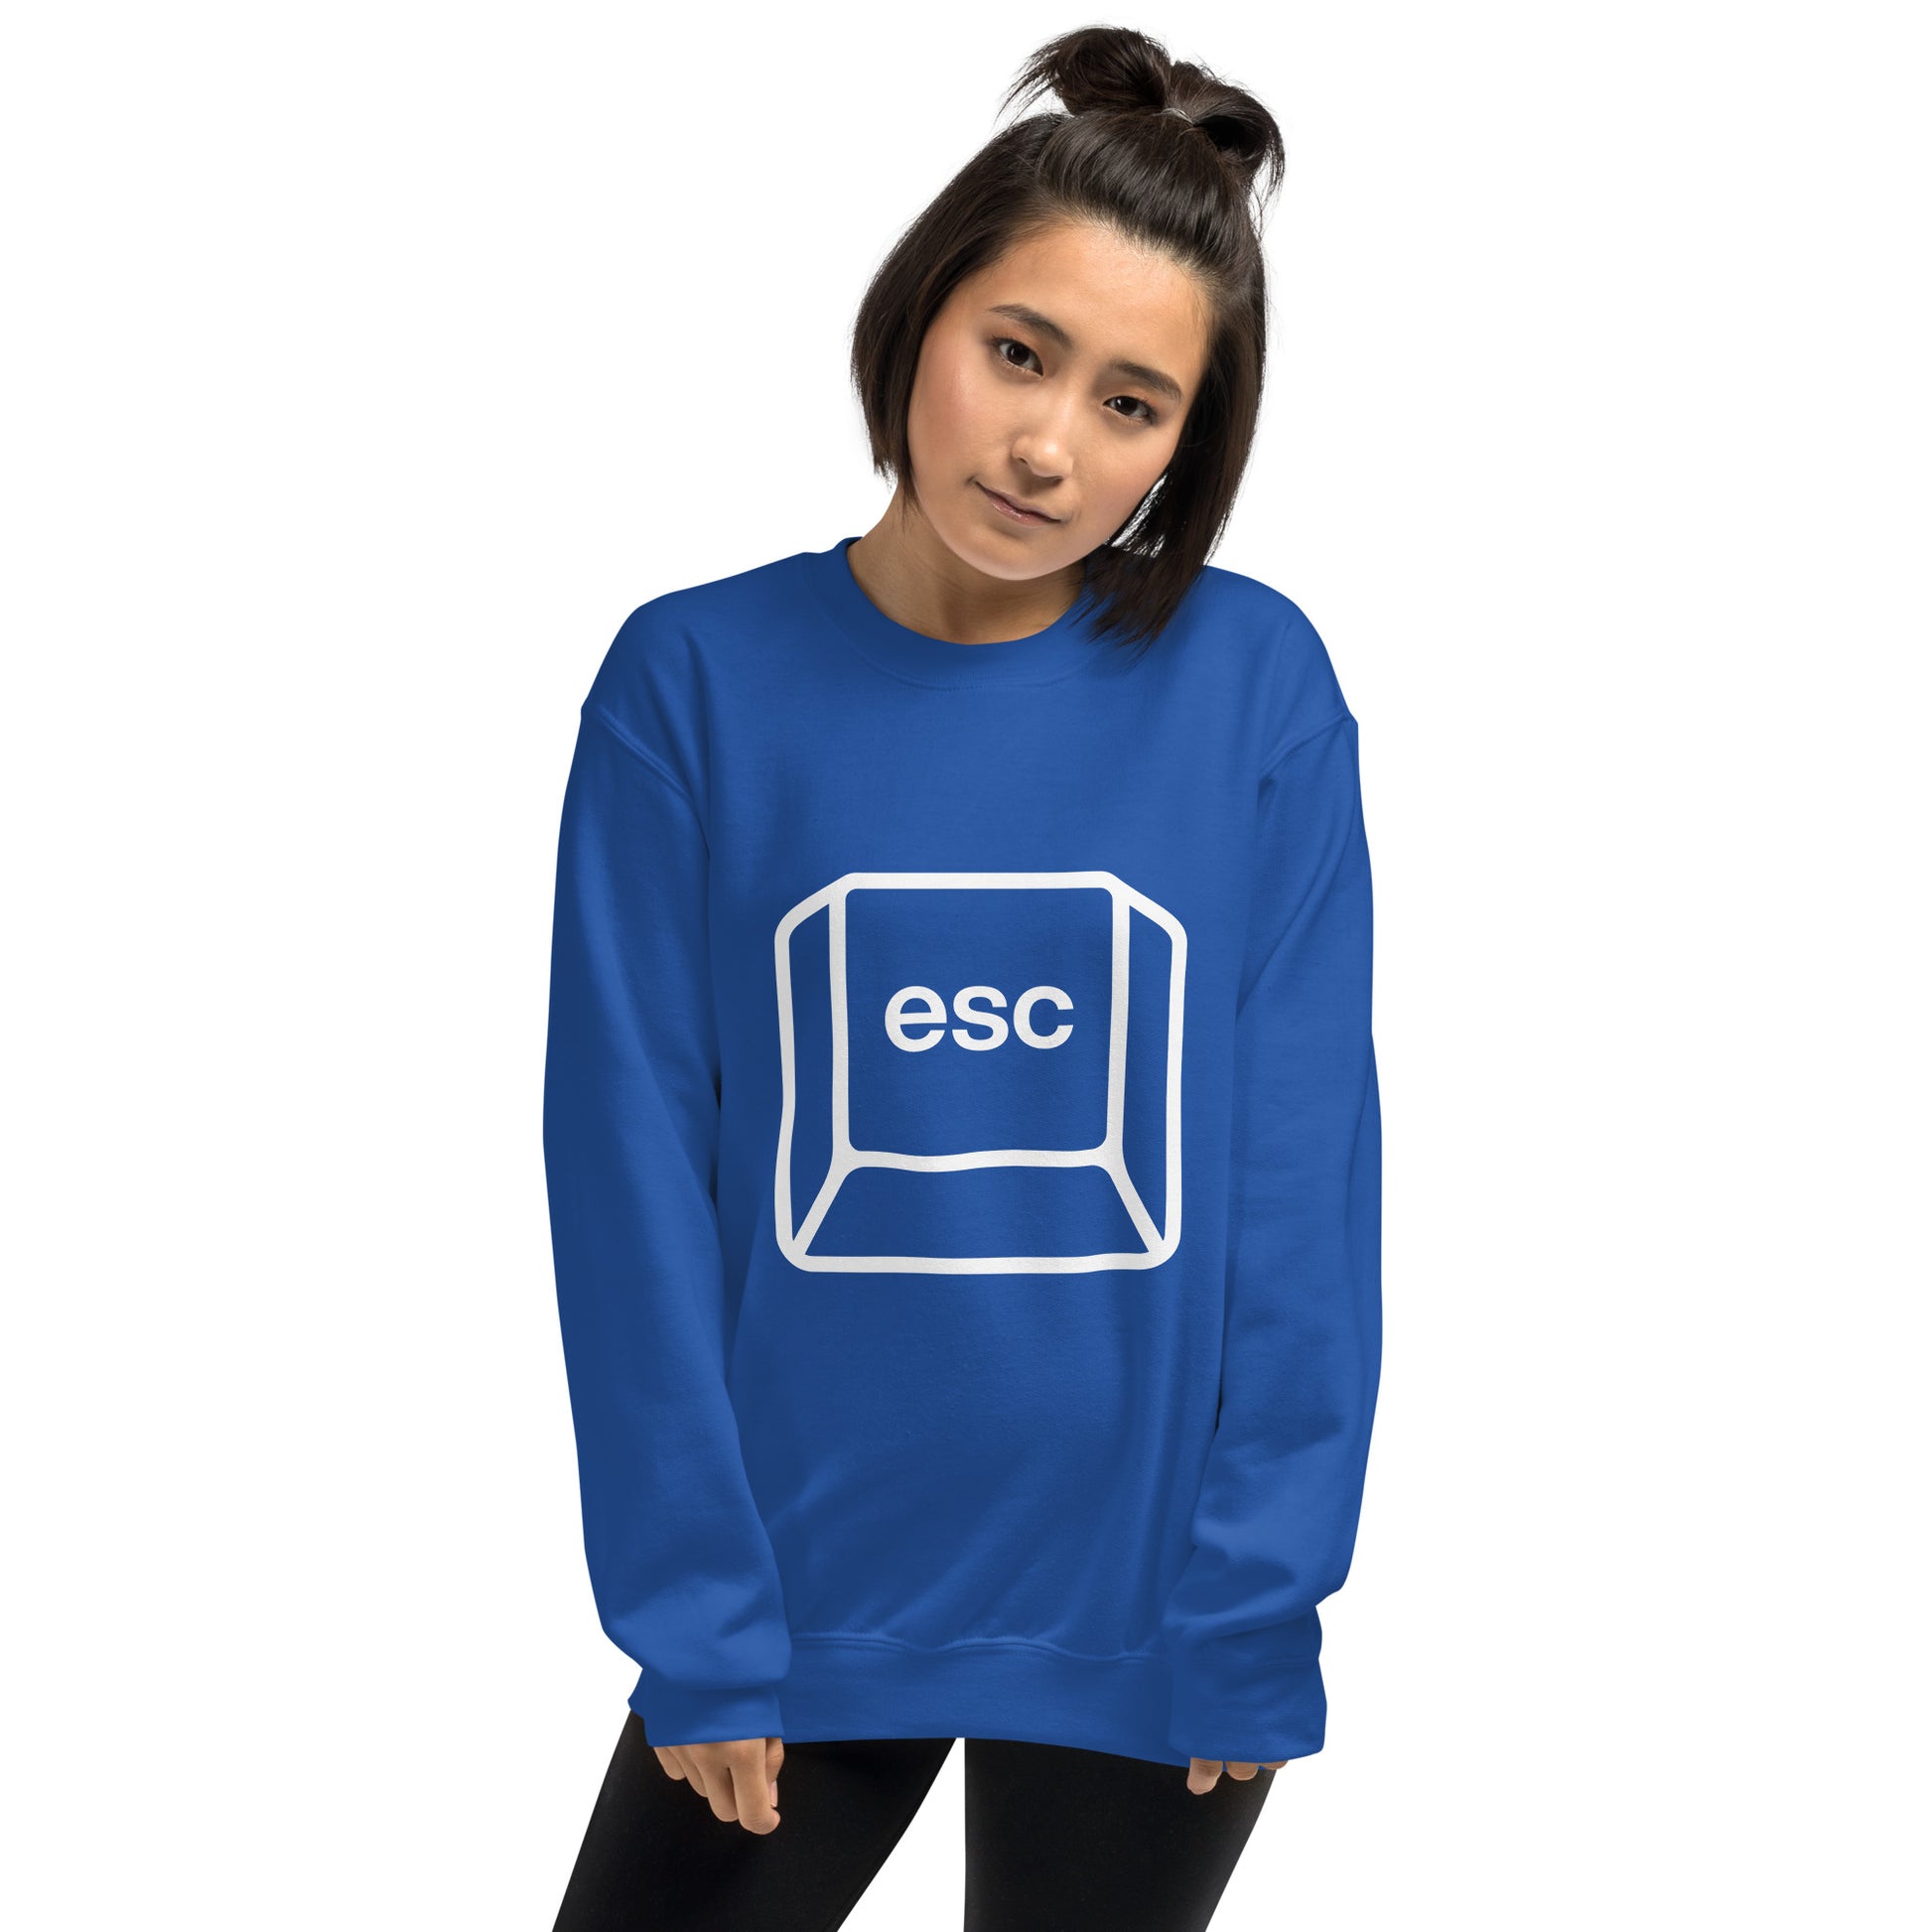 Woman with royal blue sweatshirt with picture of esc key